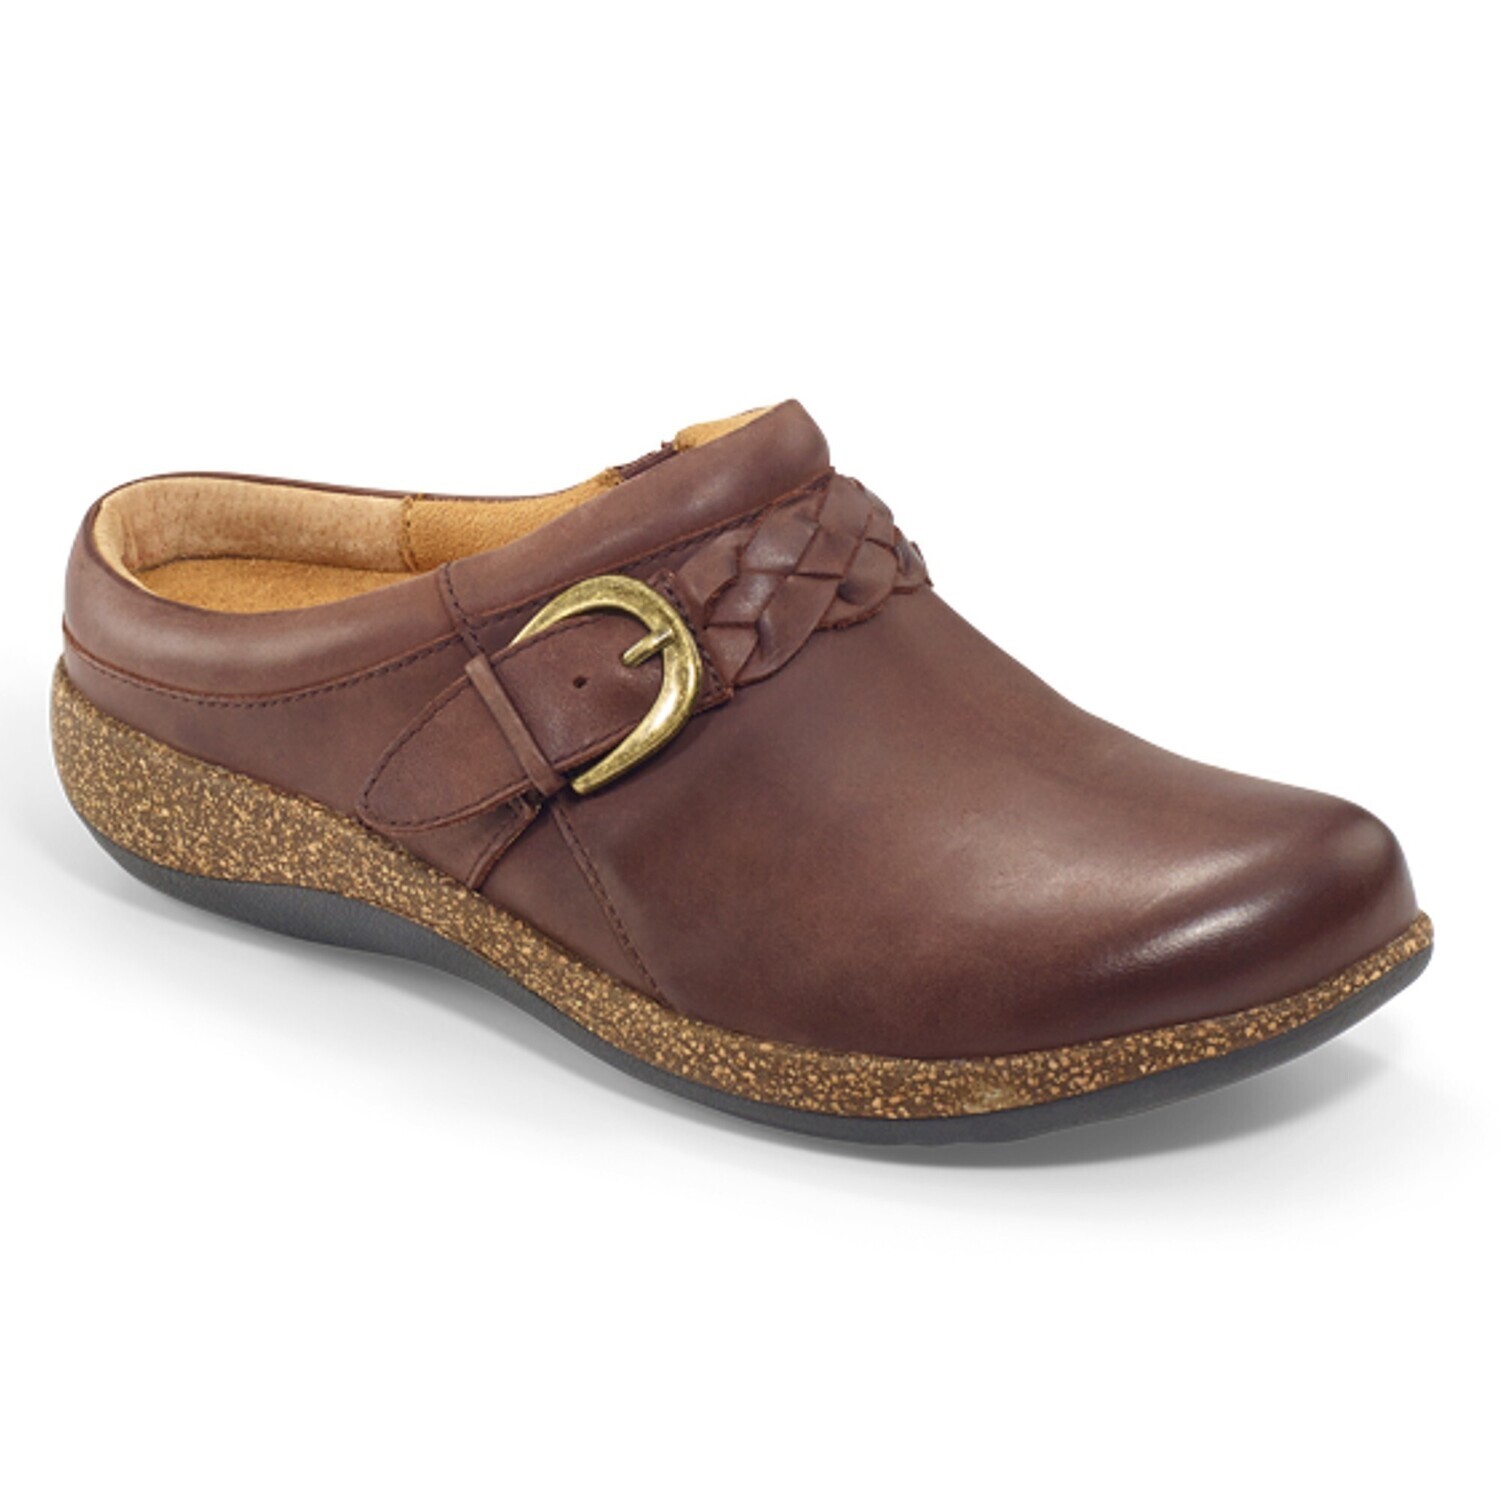 Libby, Color: Brown, Size: 36